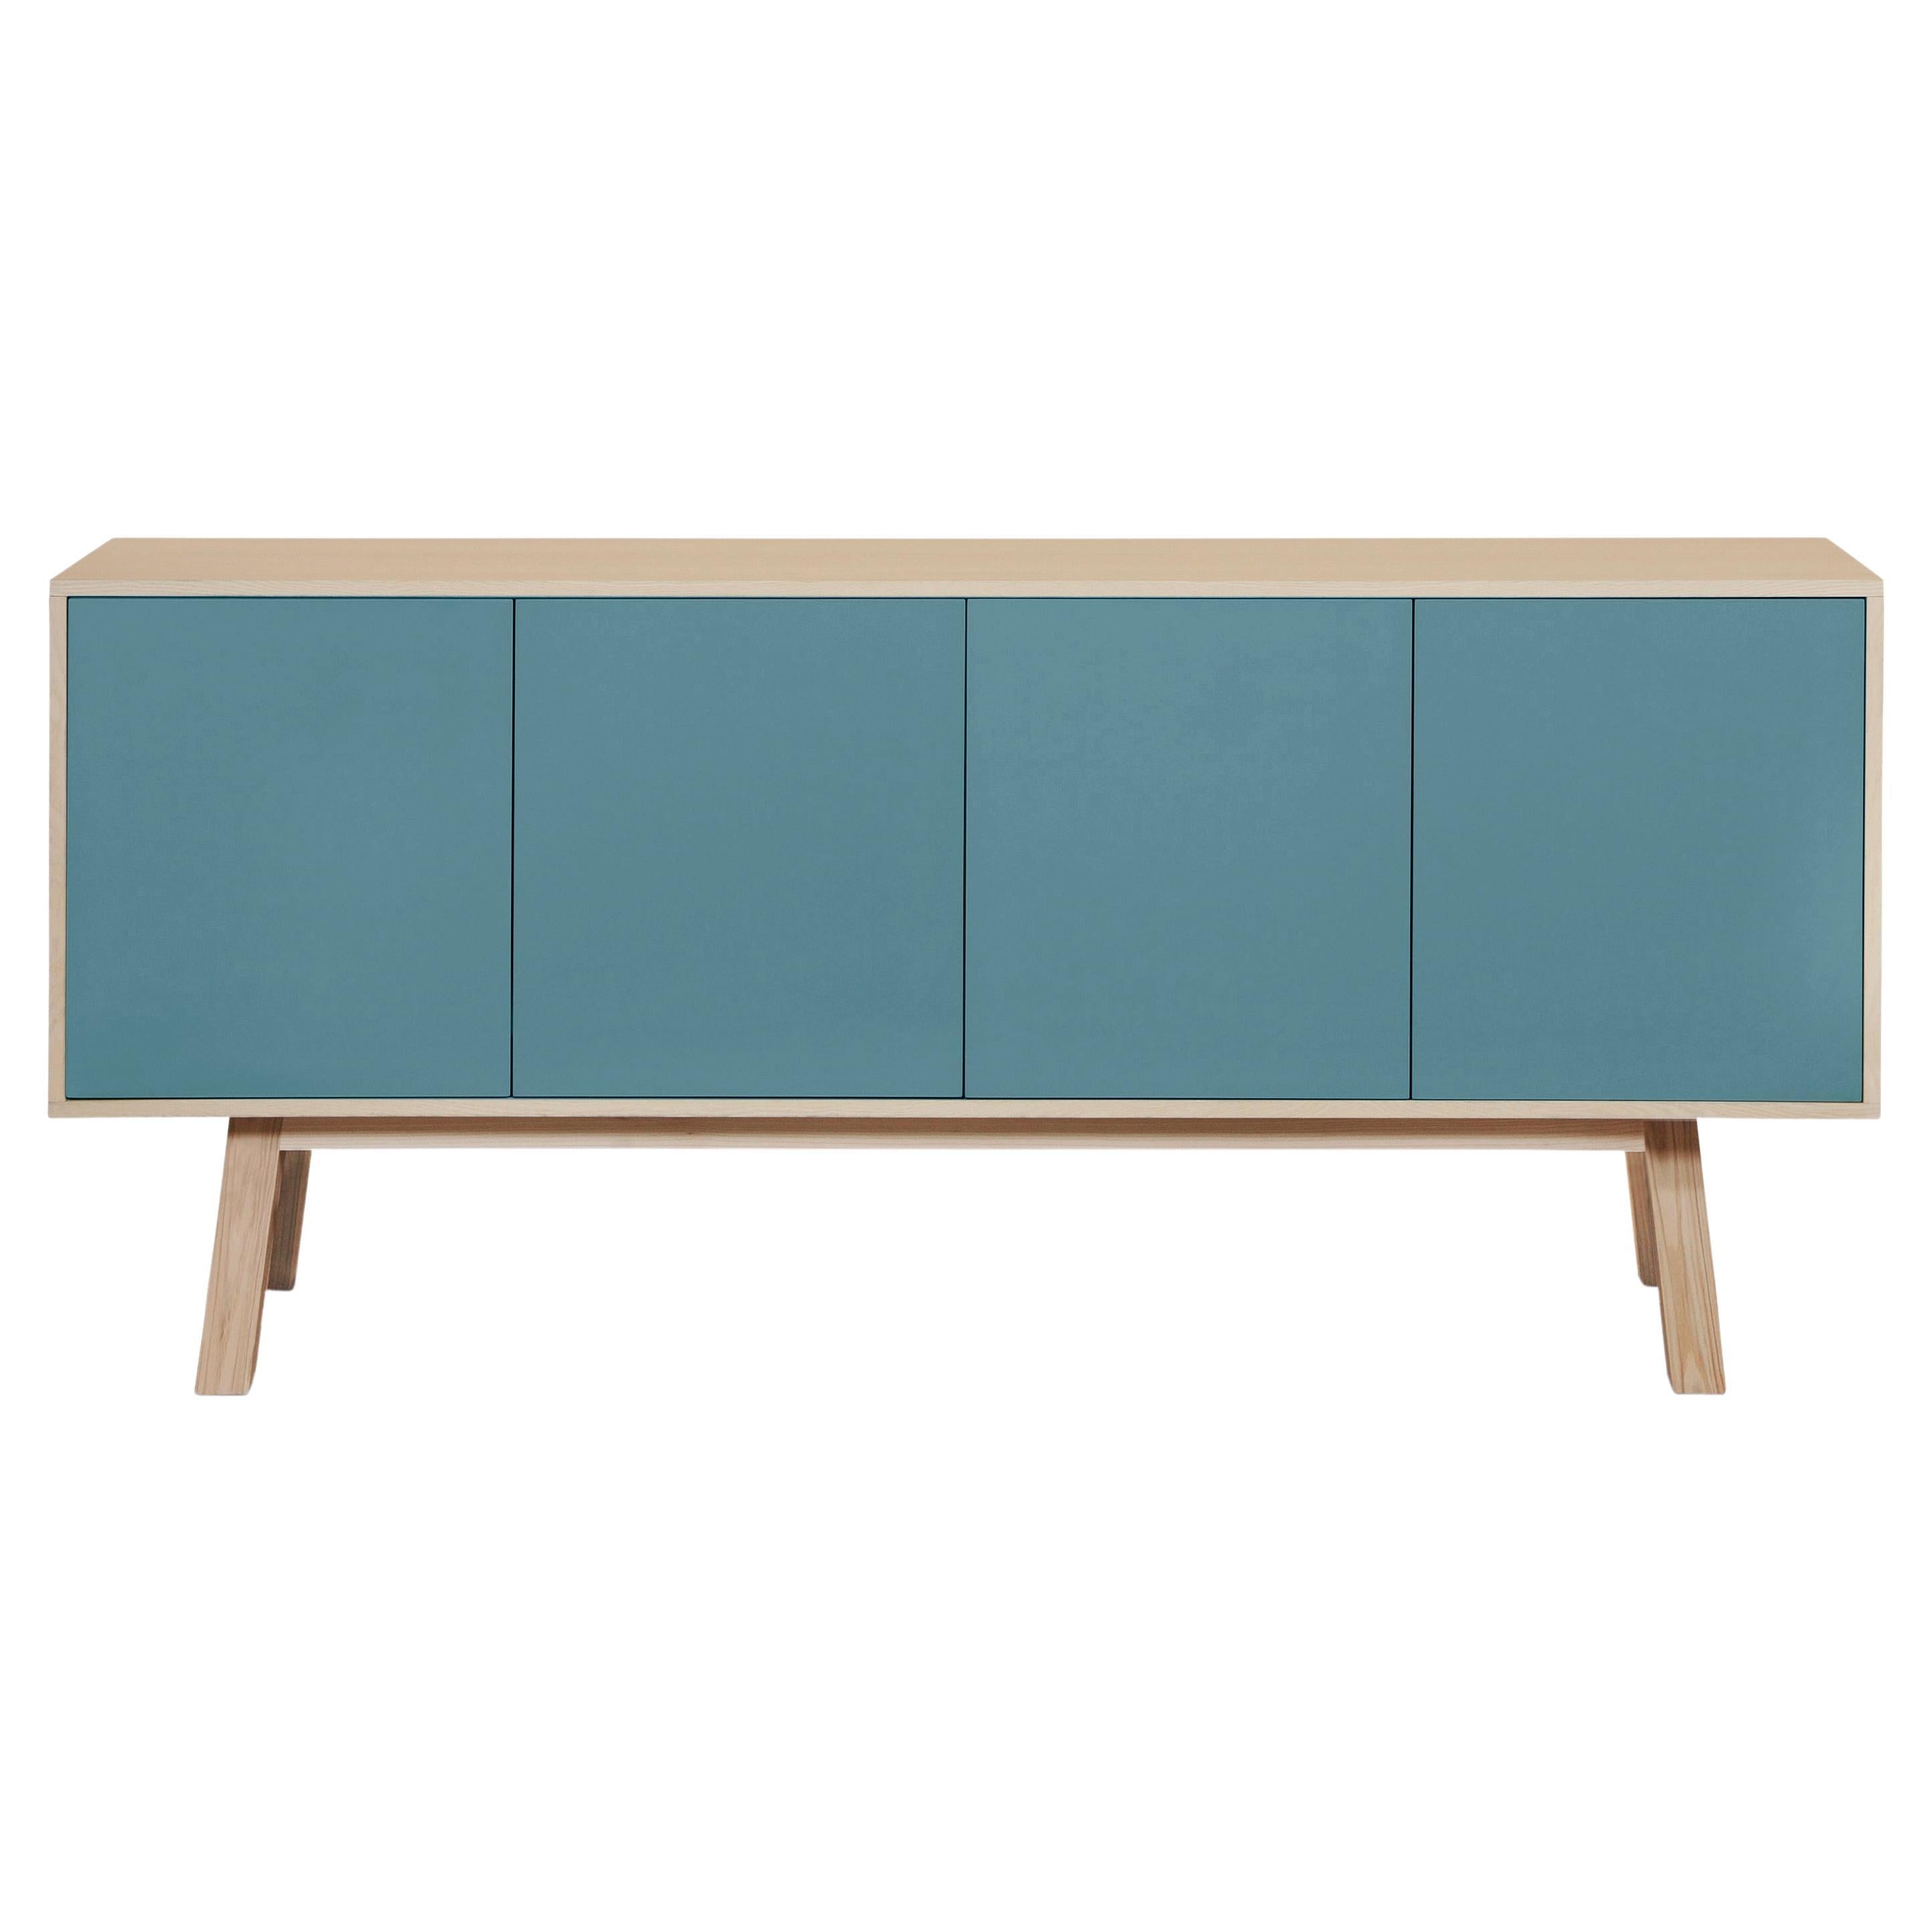 Light Blue 4-Door Sideboard Kube in Ash Wood, Design by Eric Gizard, Paris For Sale